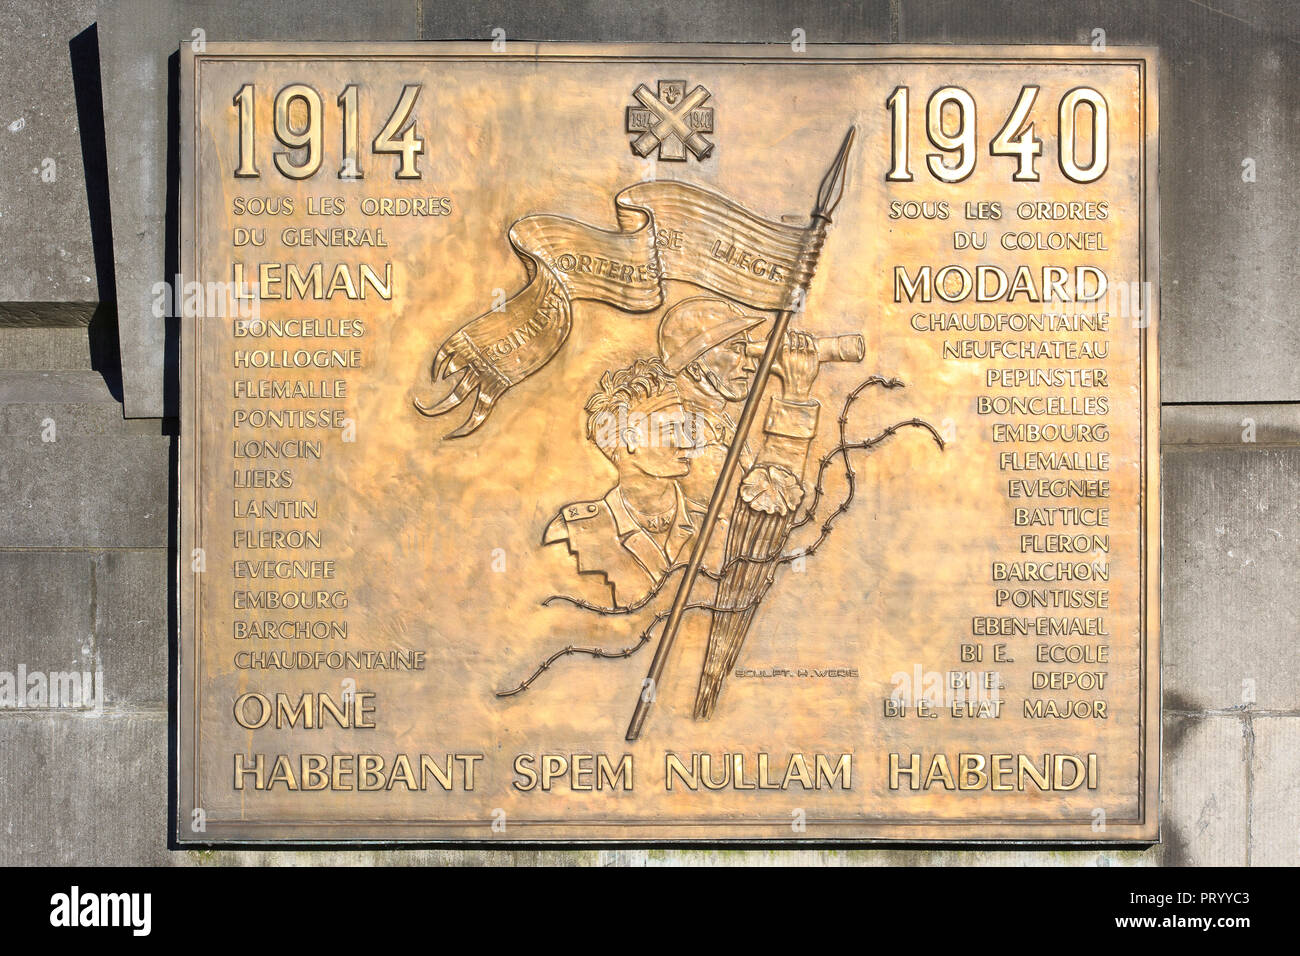 Commemorative plaque for the heroes that fought and died during World War I and II defending Liege, Belgium Stock Photo